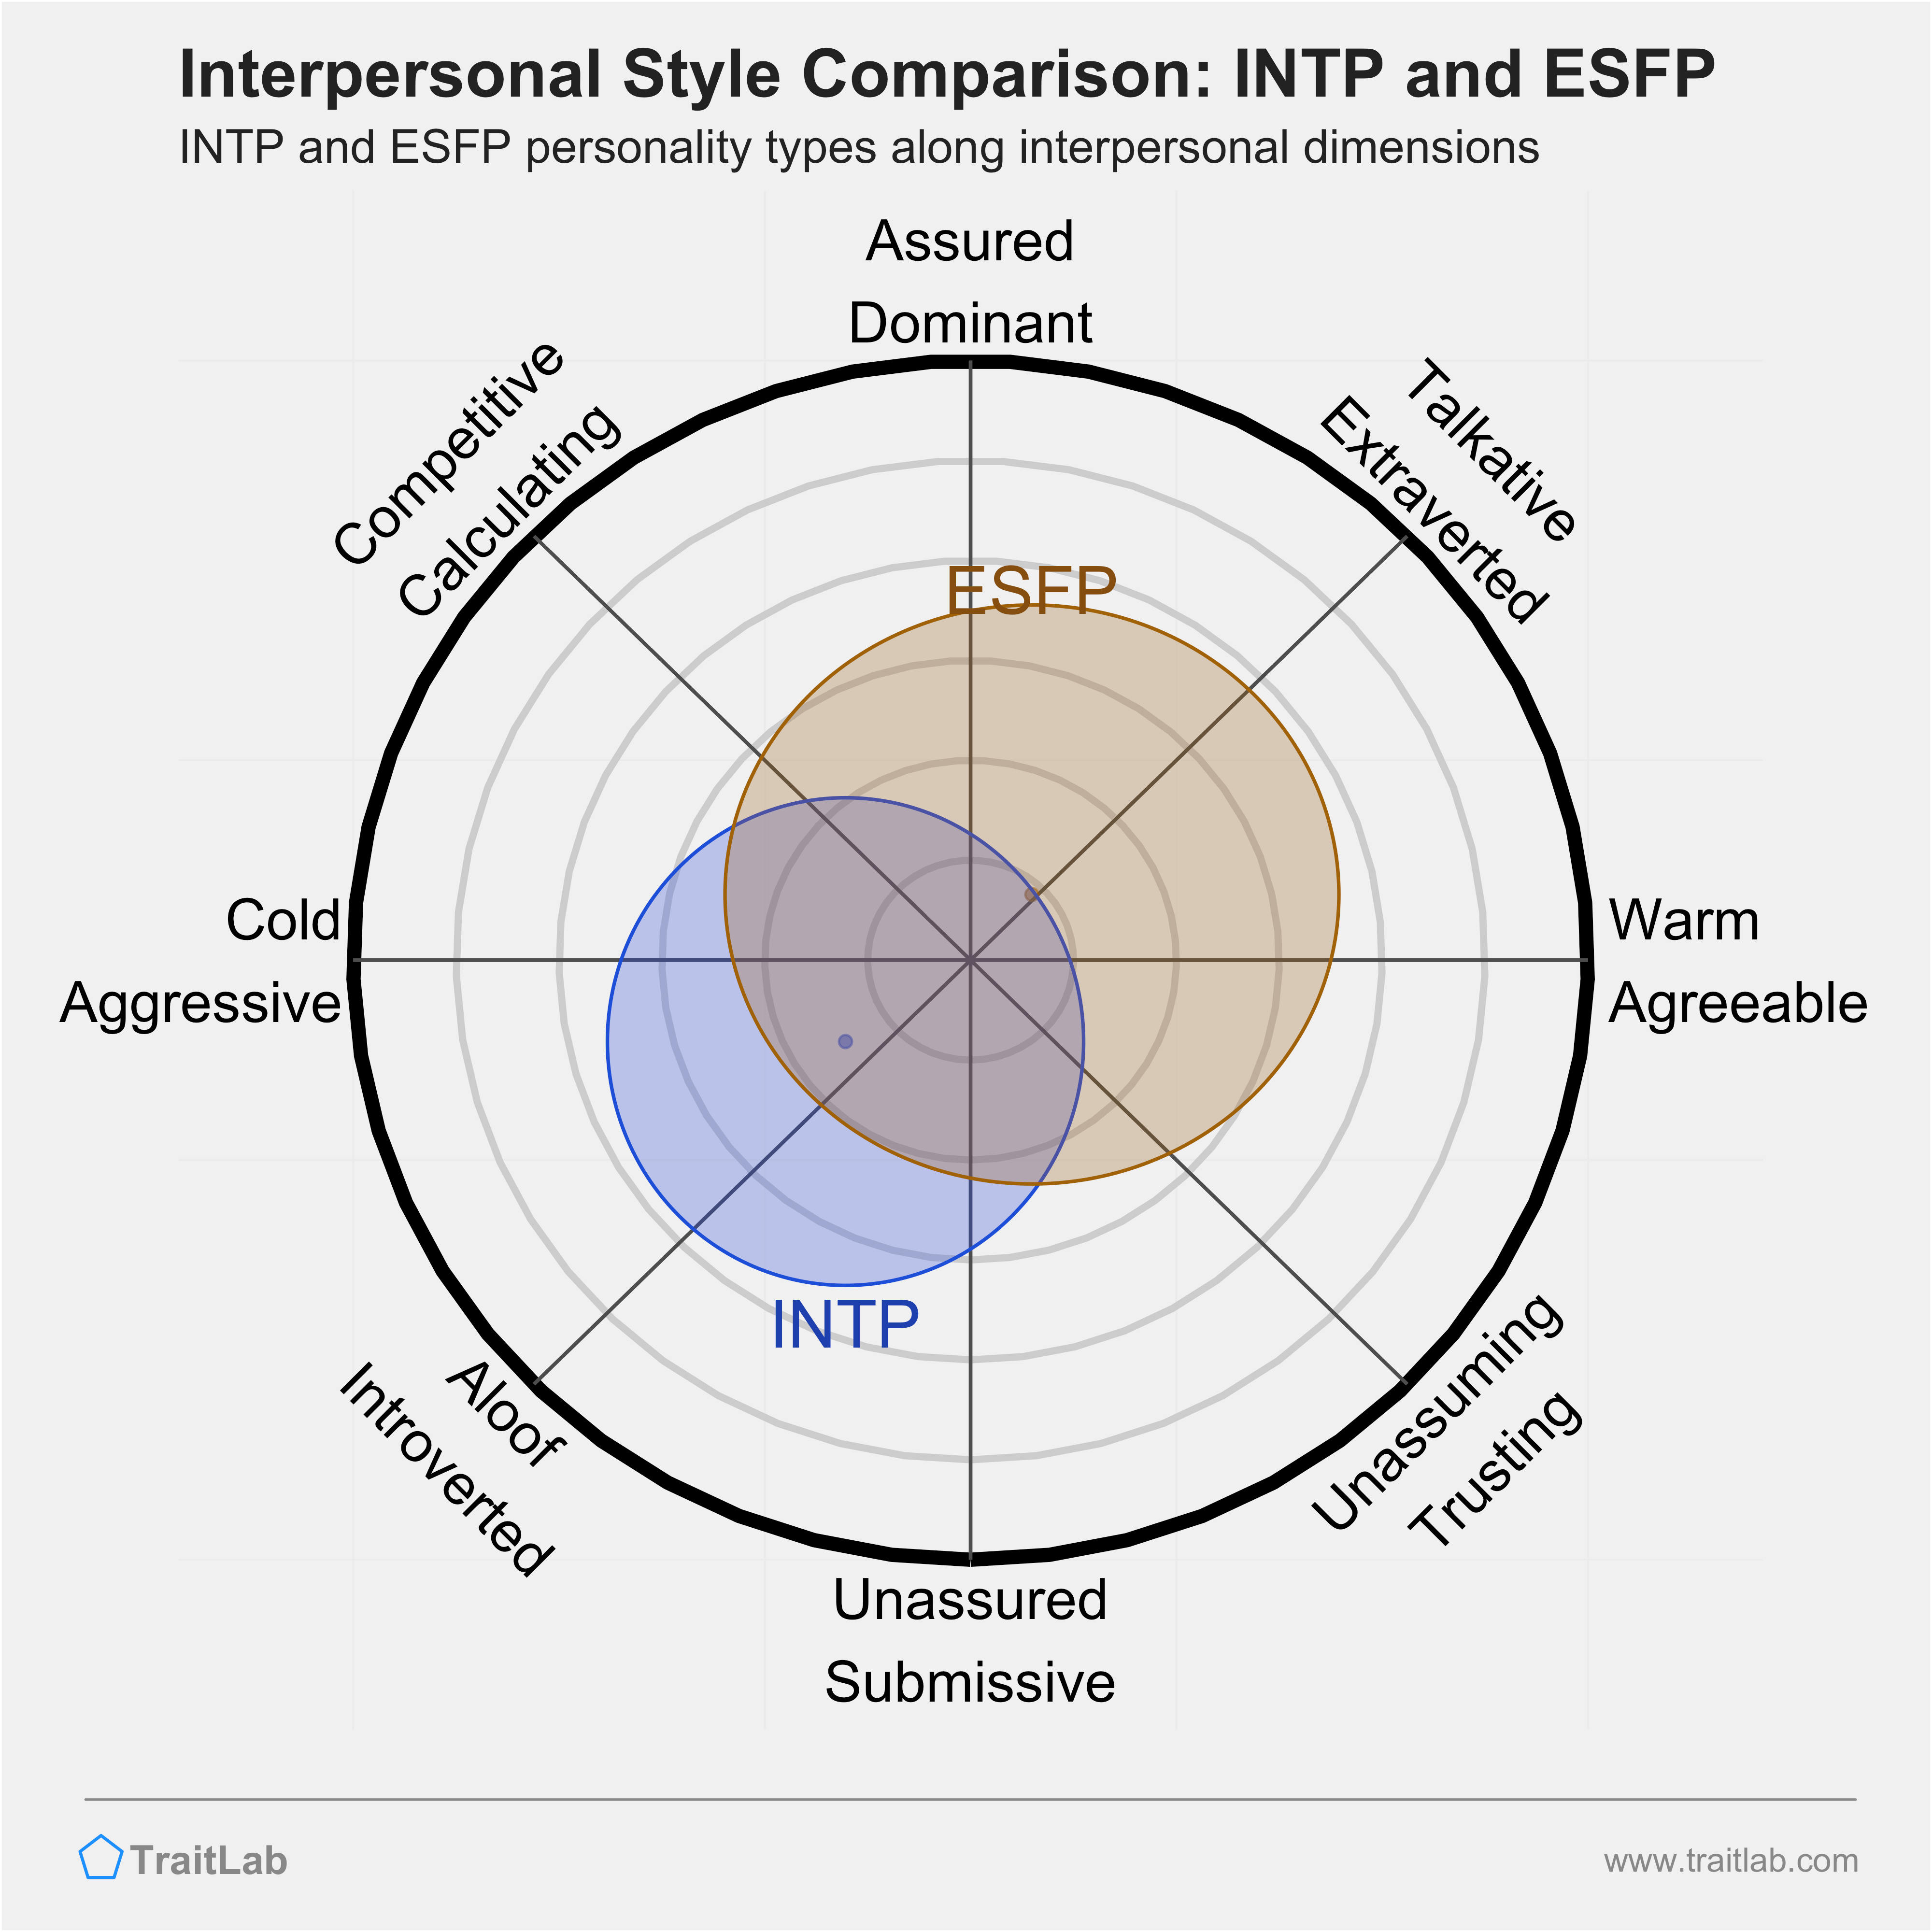 INTP and ESFP comparison across interpersonal dimensions